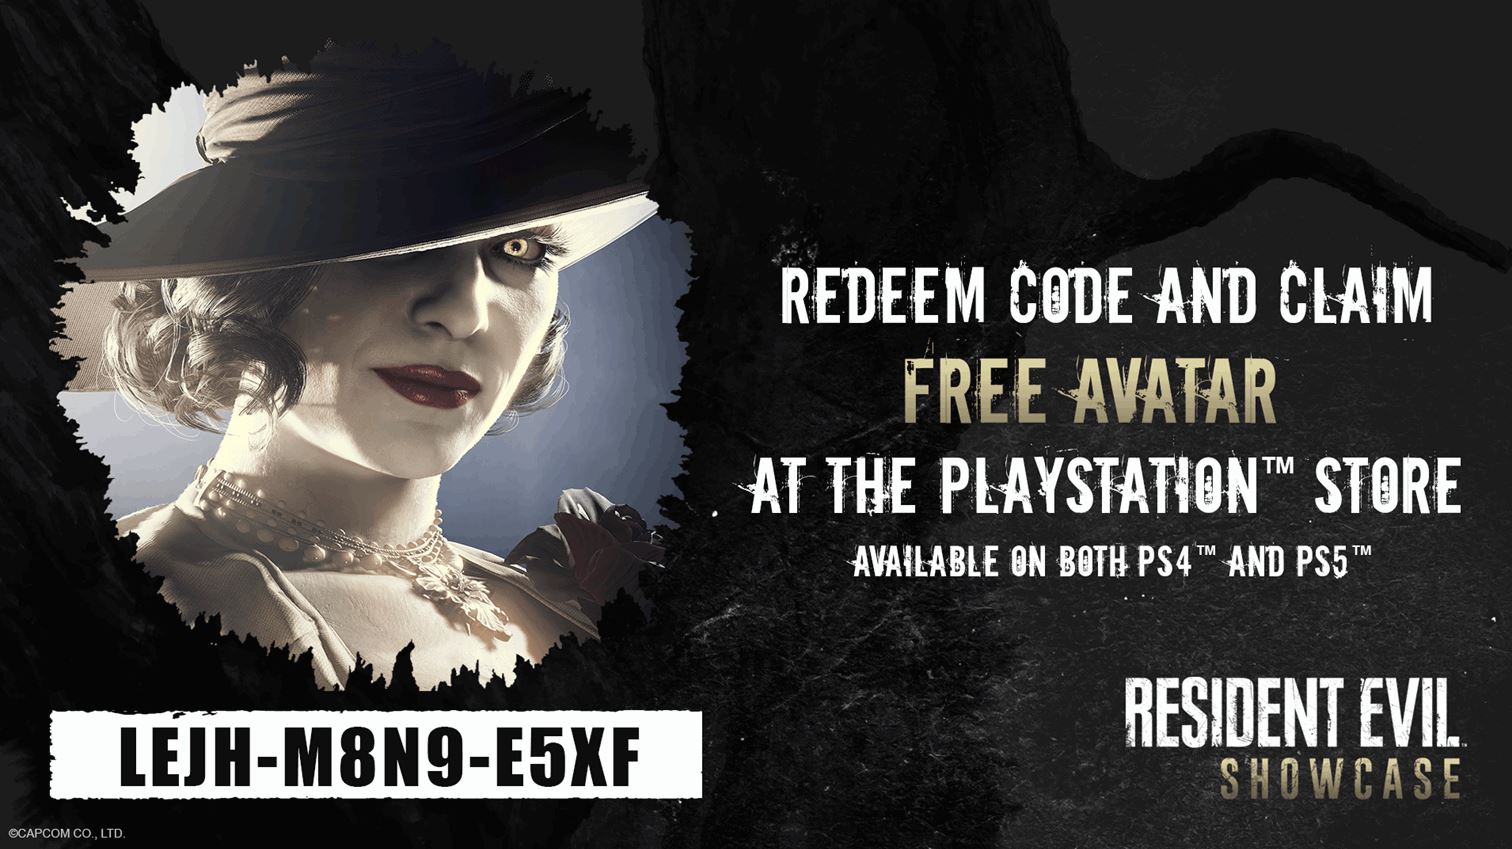 resident-evil-village-vampire-lady-psn-avatars-available-with-this-playstation-store-code.jpg